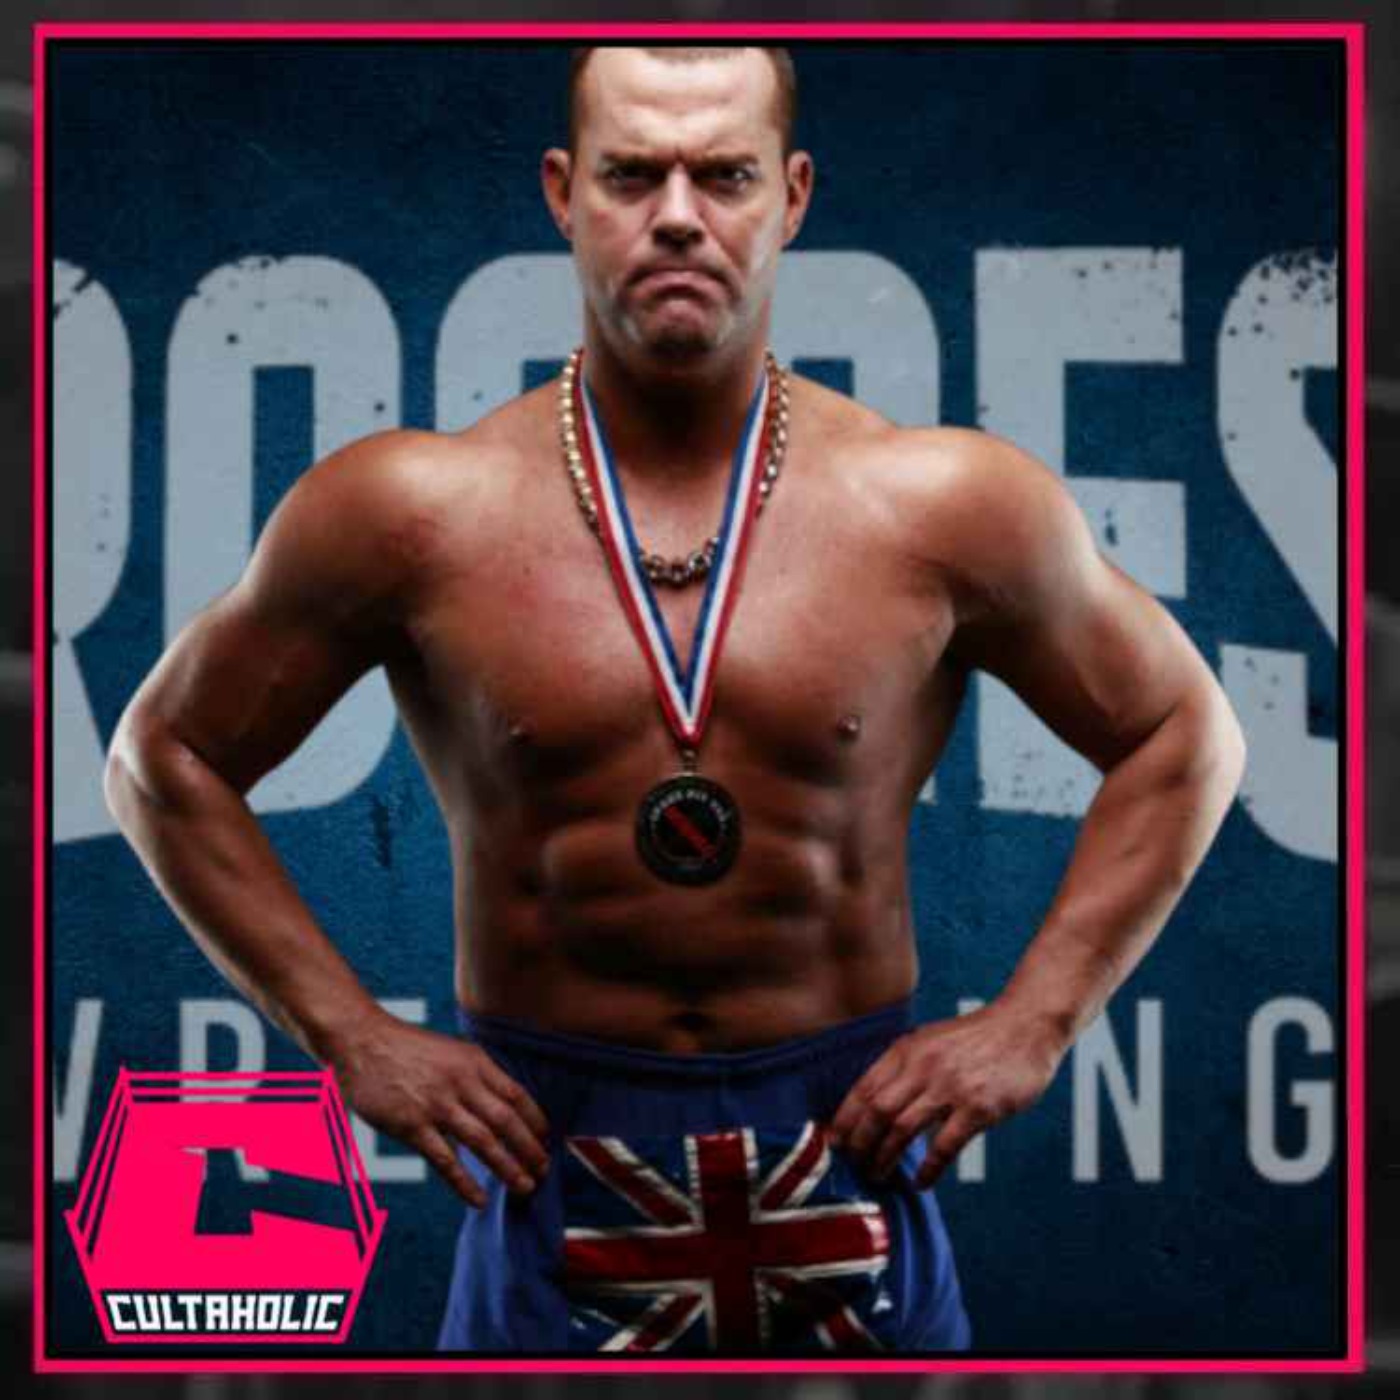 EXCLUSIVE INTERVIEW: Davey Boy Smith Jr on British Bulldog, AEW, PROGRESS, Will Ospreay and UK Wrestling Fans